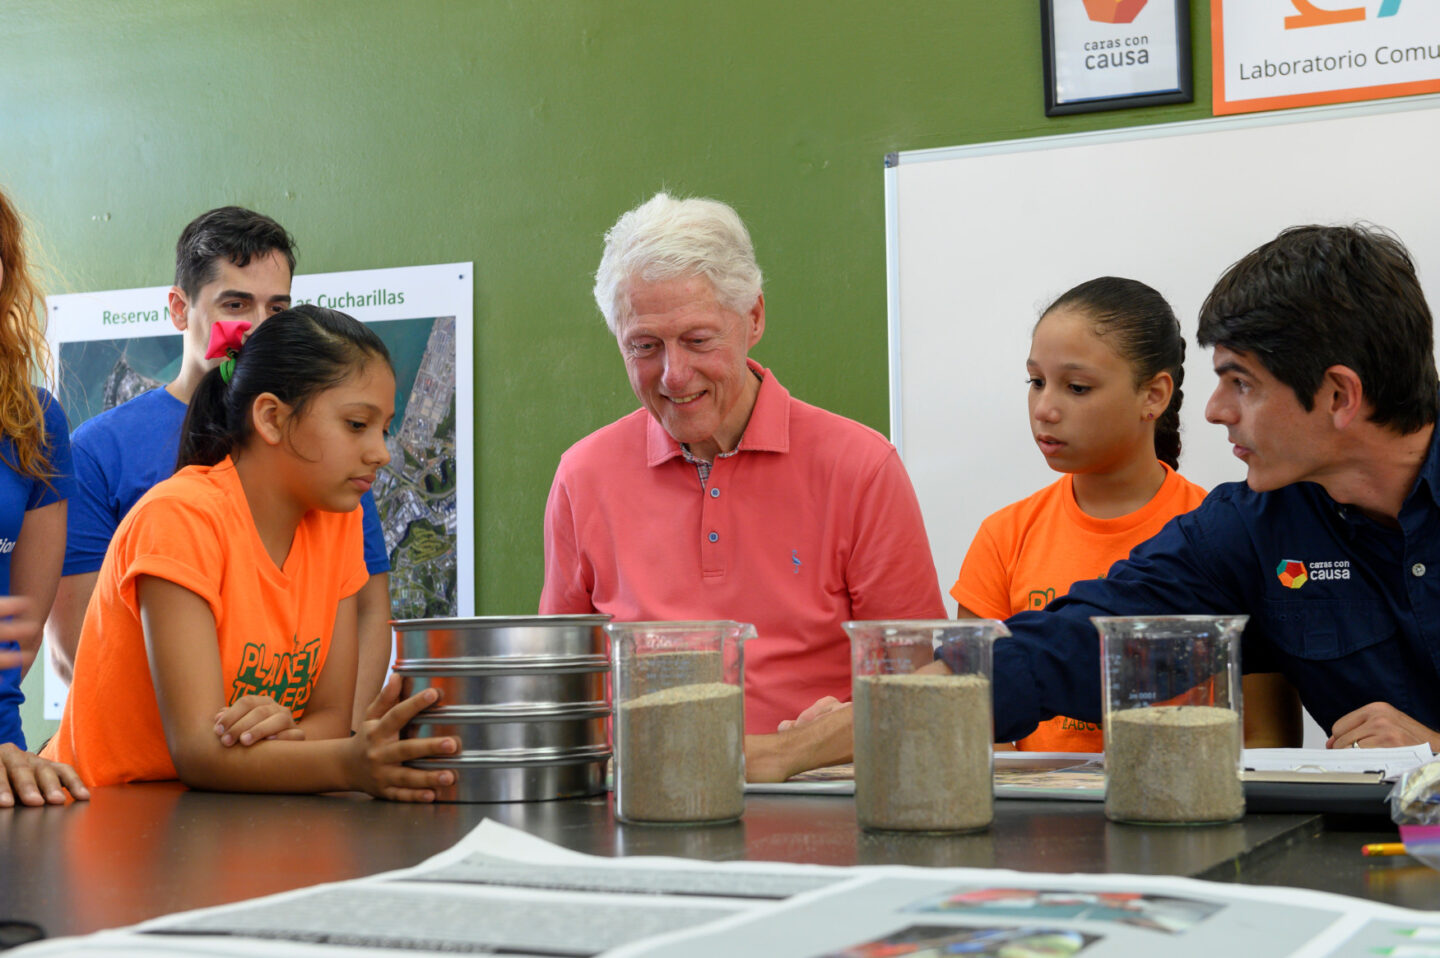 President Clinton visits with students at a school in Puerto Rico